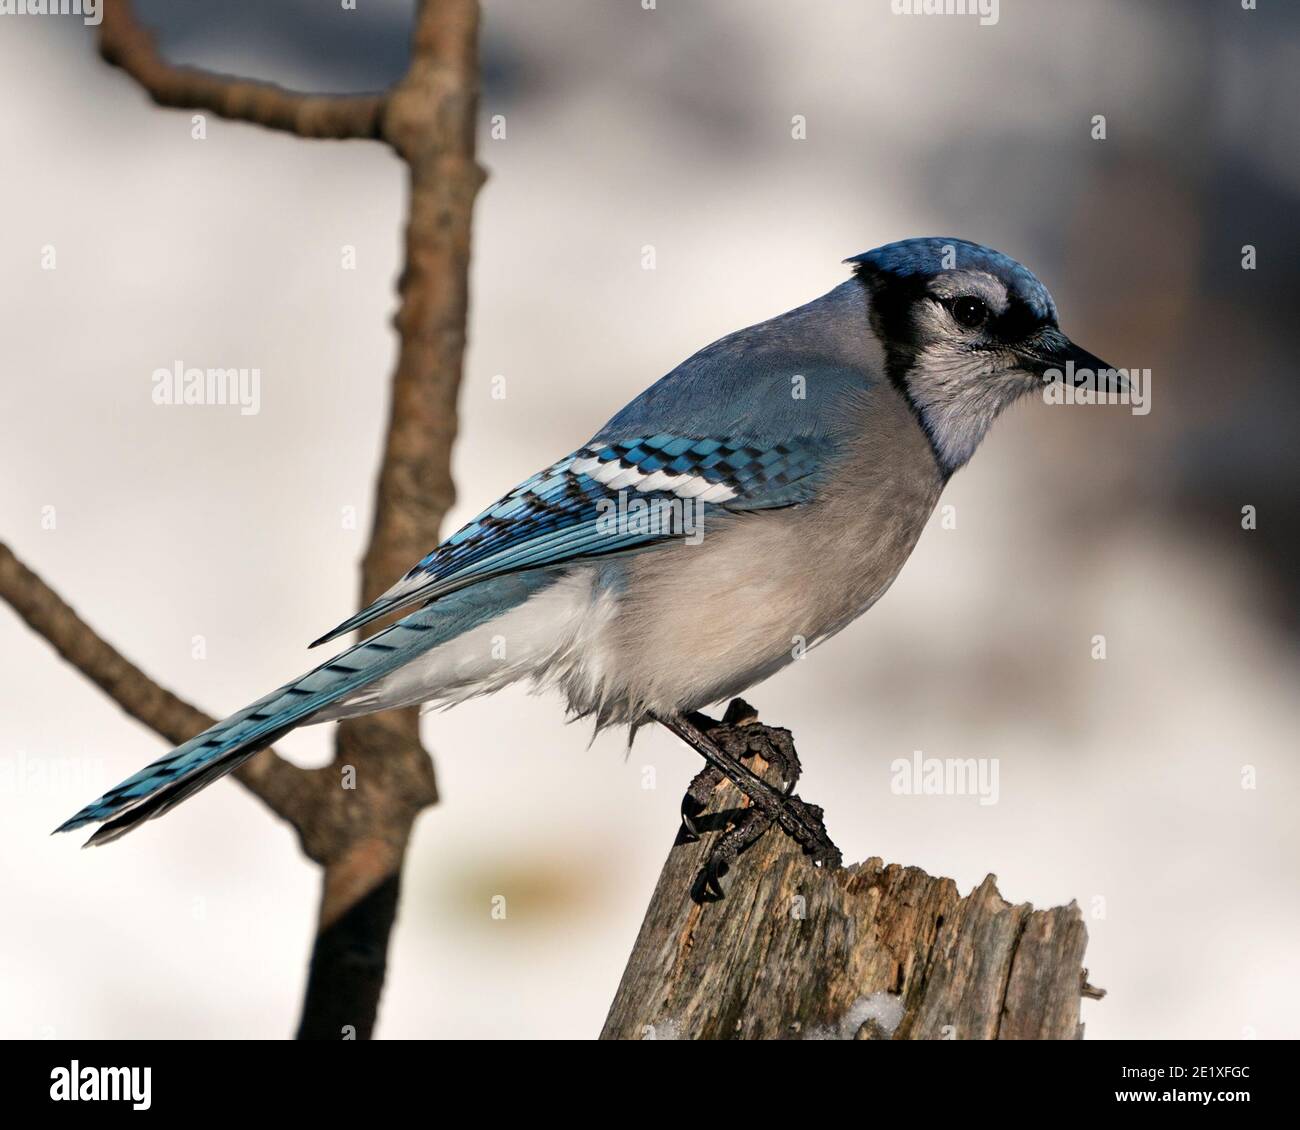 Blue Jay perched with a blur background in the forest environment and habitat. Image.Picture.Portrait. Looking to the right side. Blue Jay Stock Photo. Stock Photo